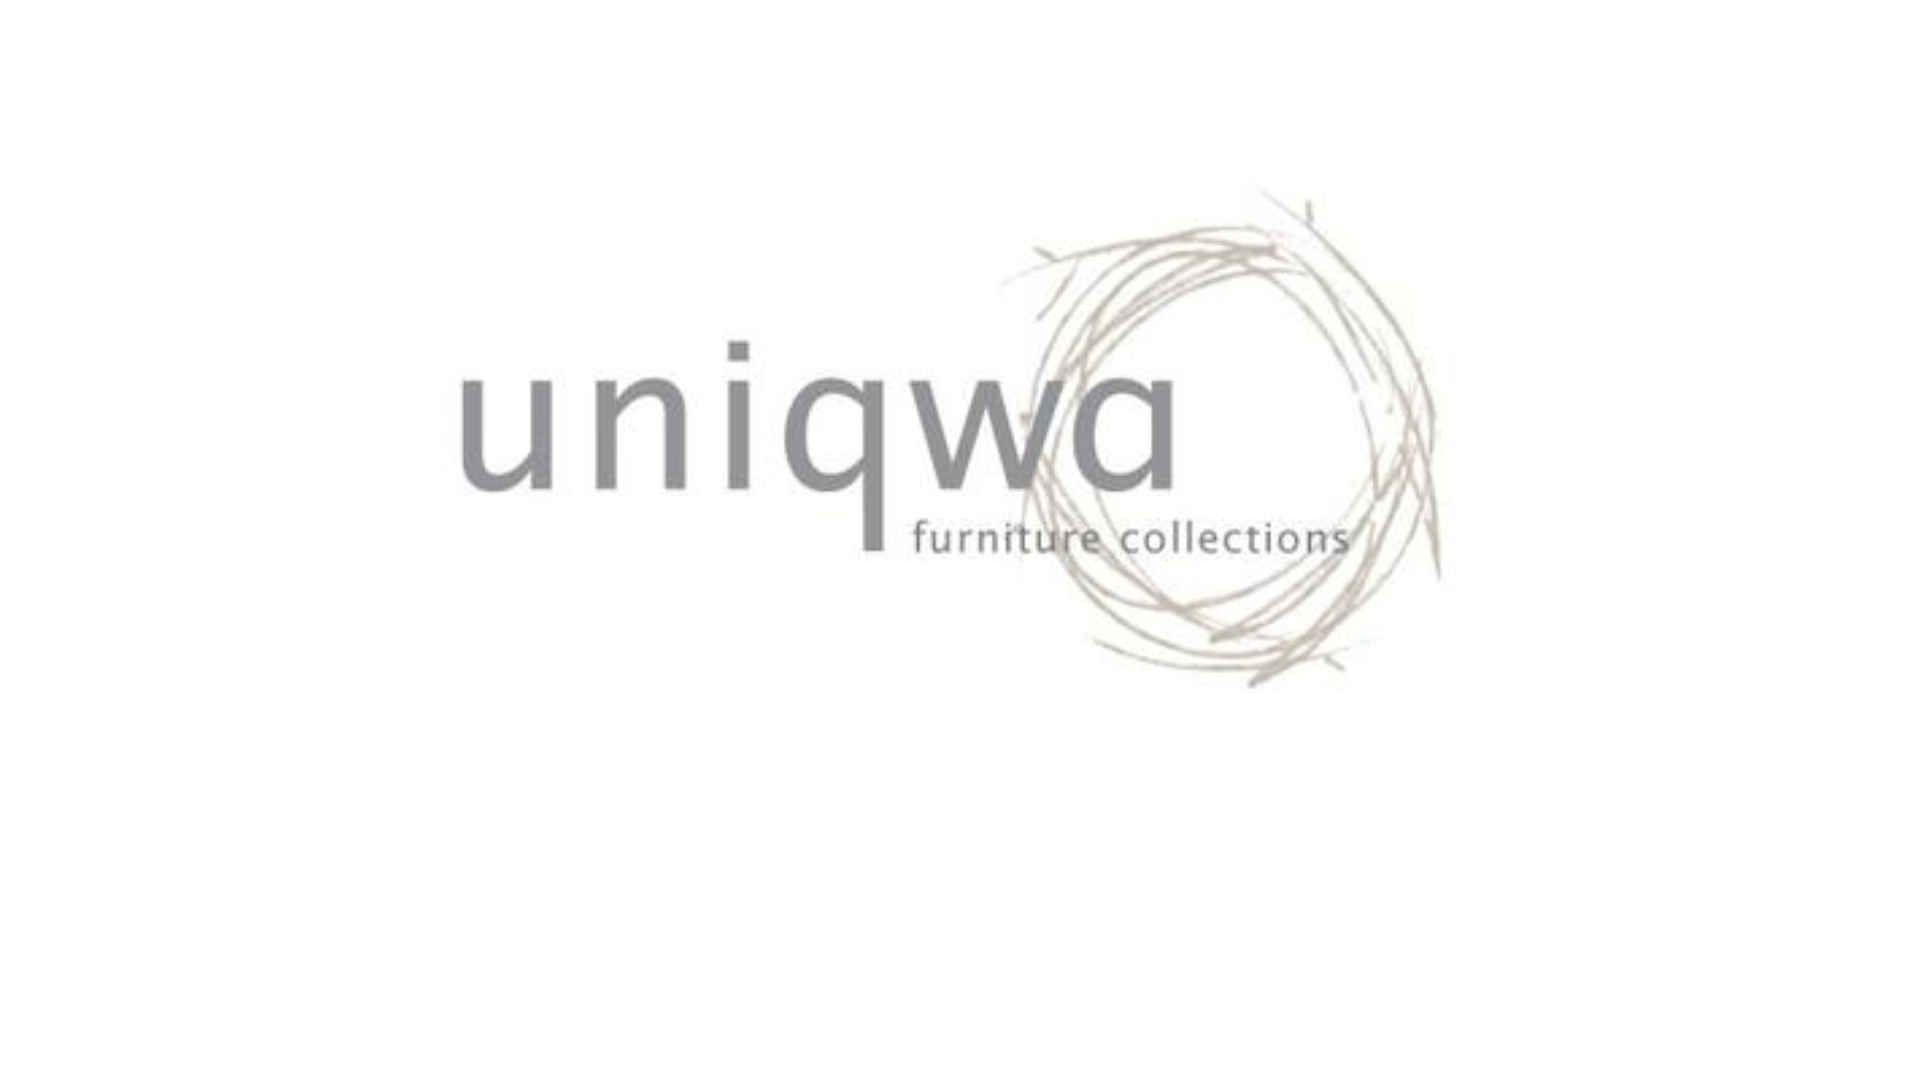 Get the Coastal style by shopping with Uniqwa